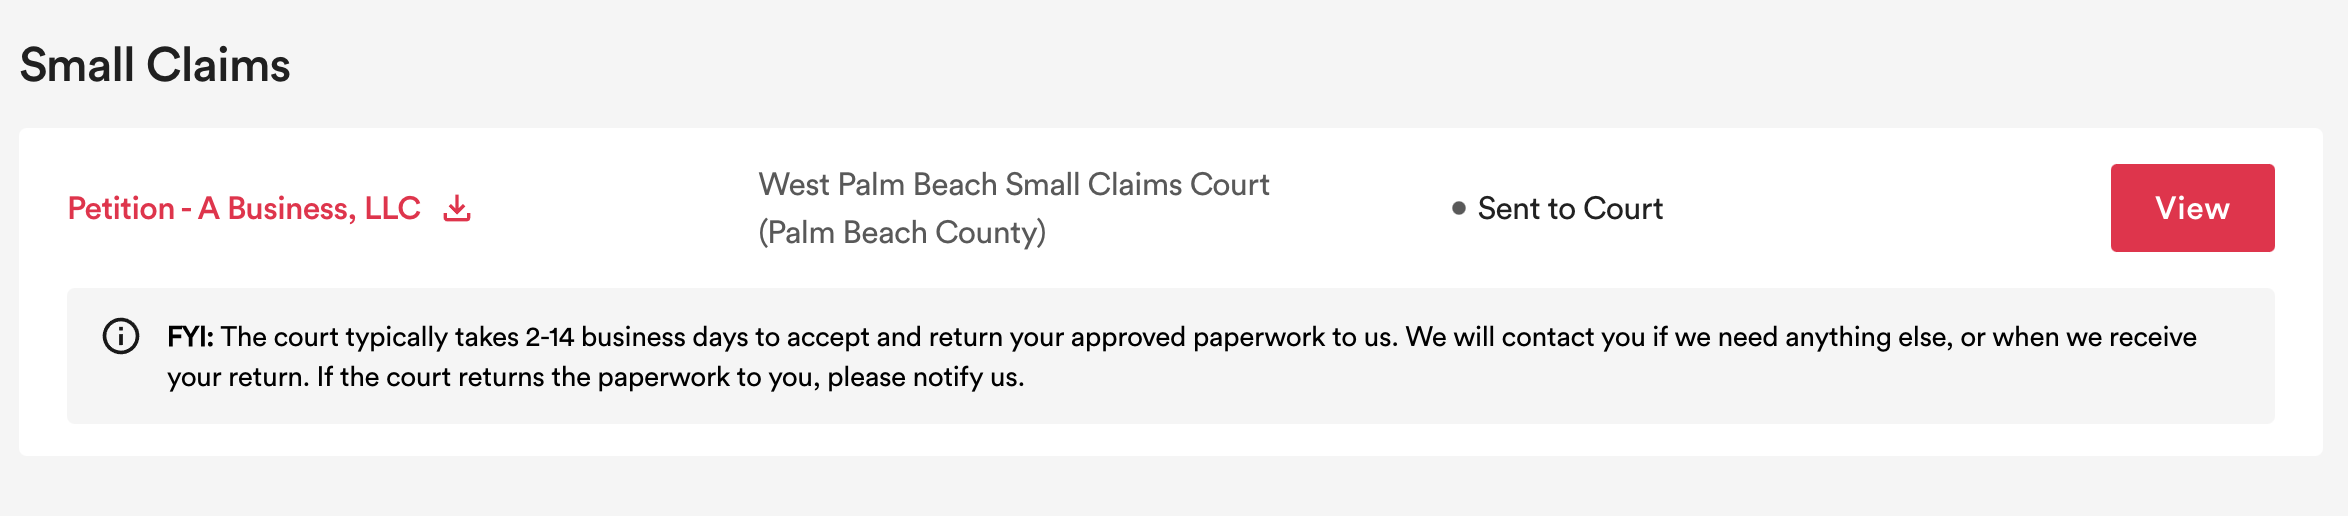 small claims case status